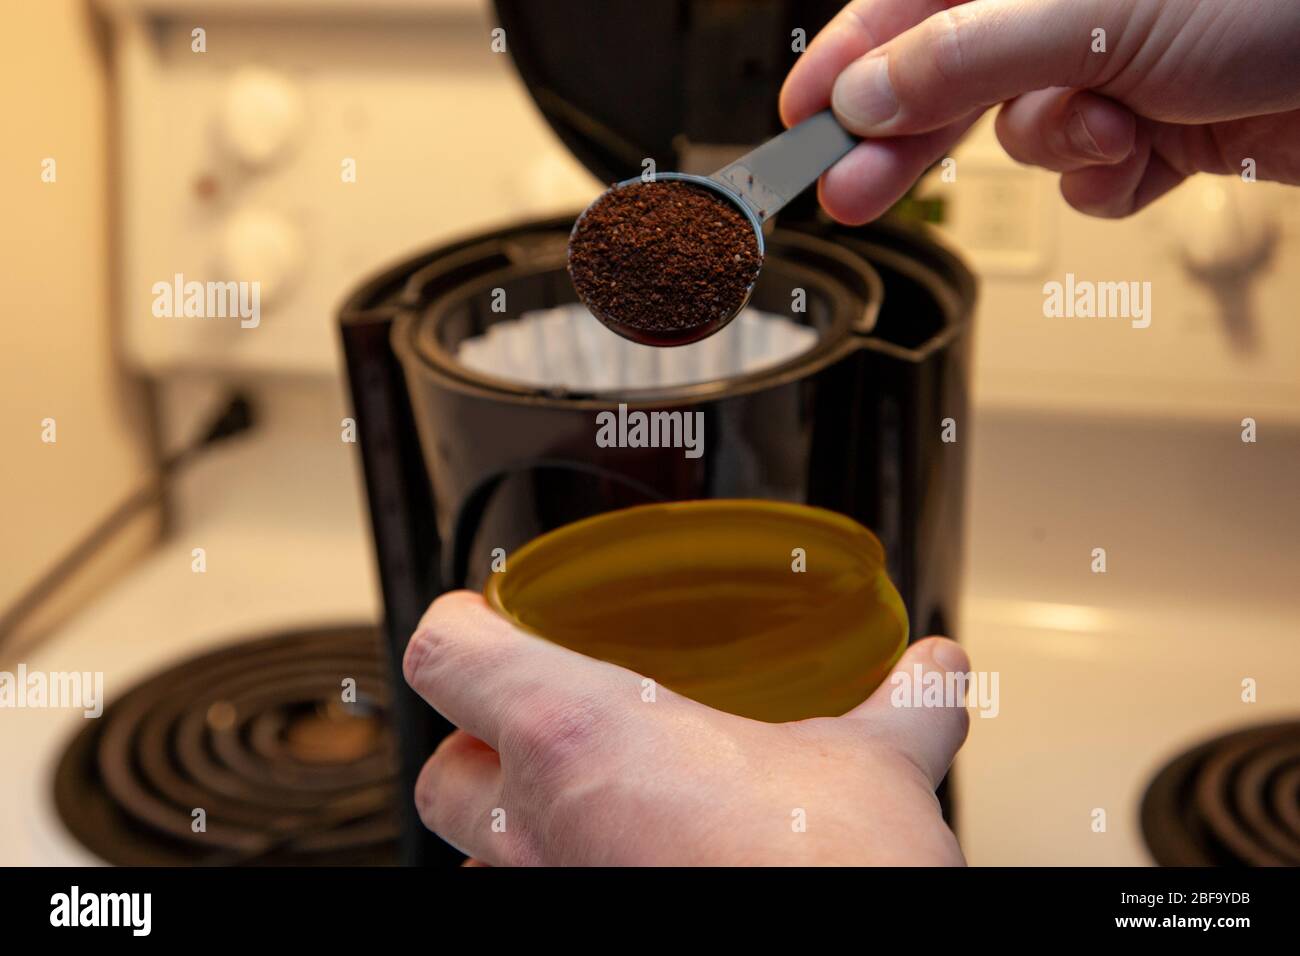 a hand measures a scoop of coffee grinds into a paper filter for coffee making Stock Photo